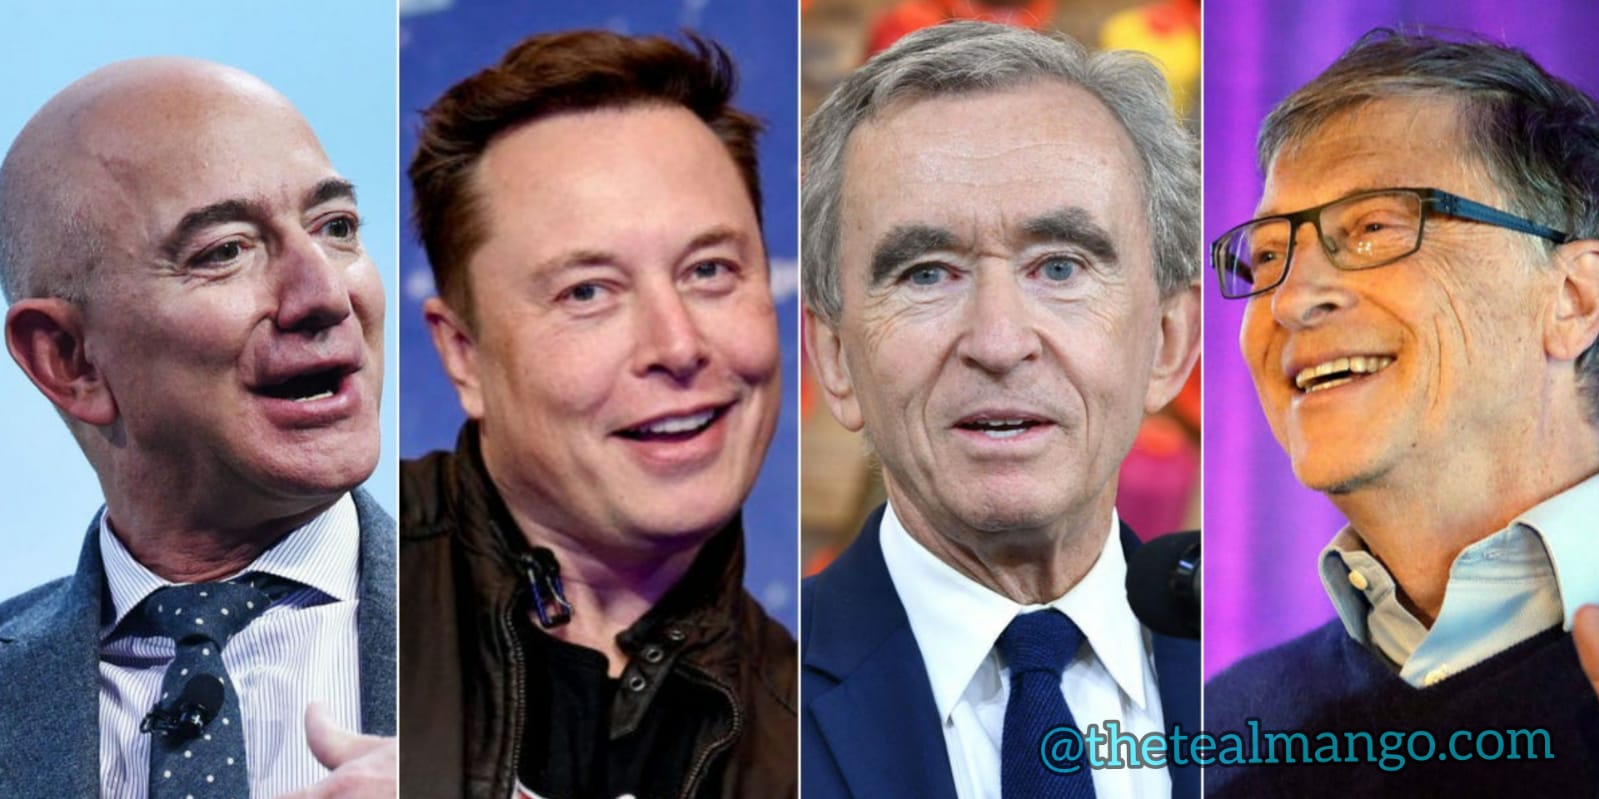 Top 10 Richest People in The World 2022